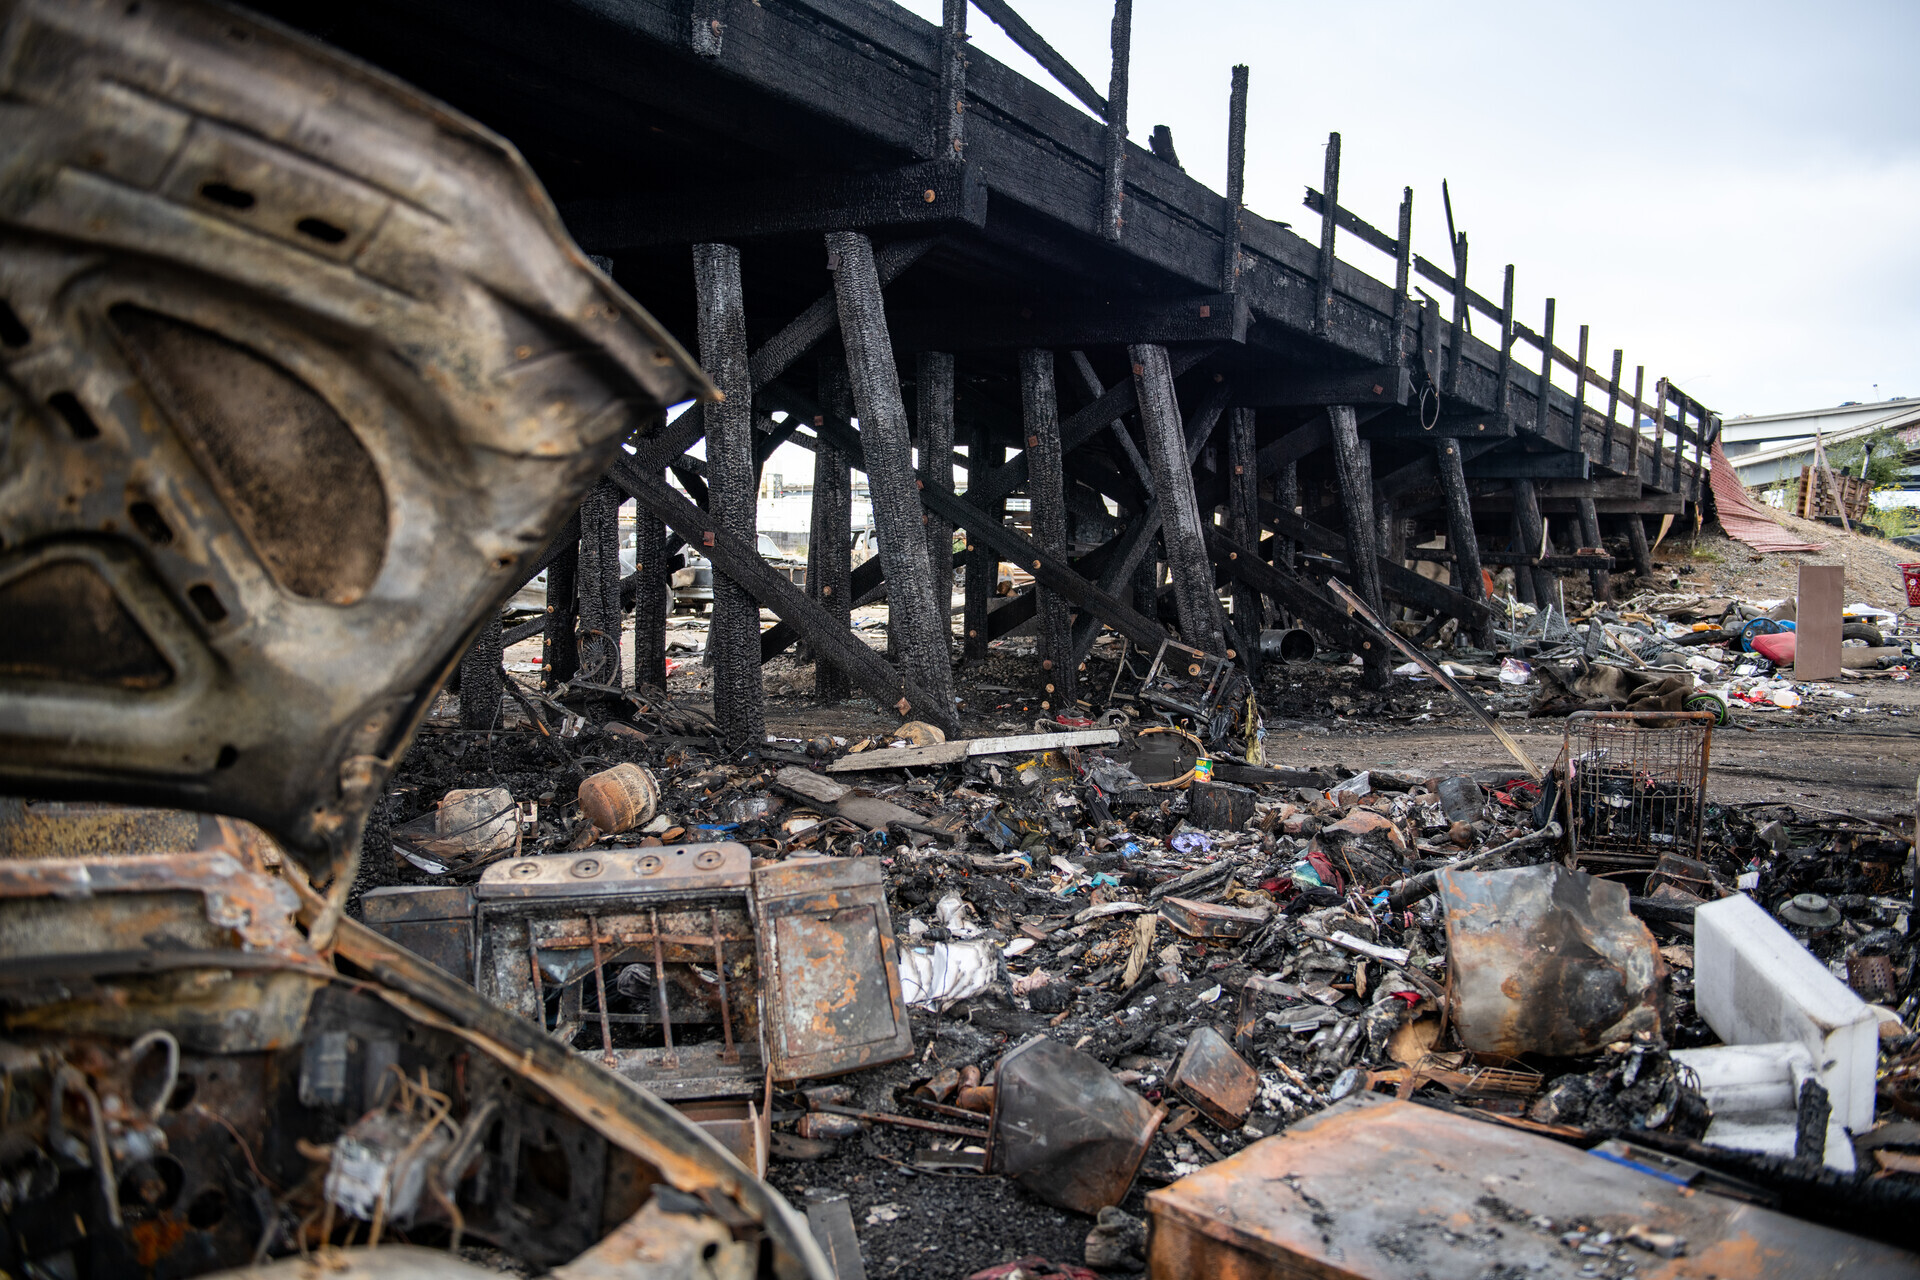 Charred cars, metal, belongings and debris are scattered throughout an open field.